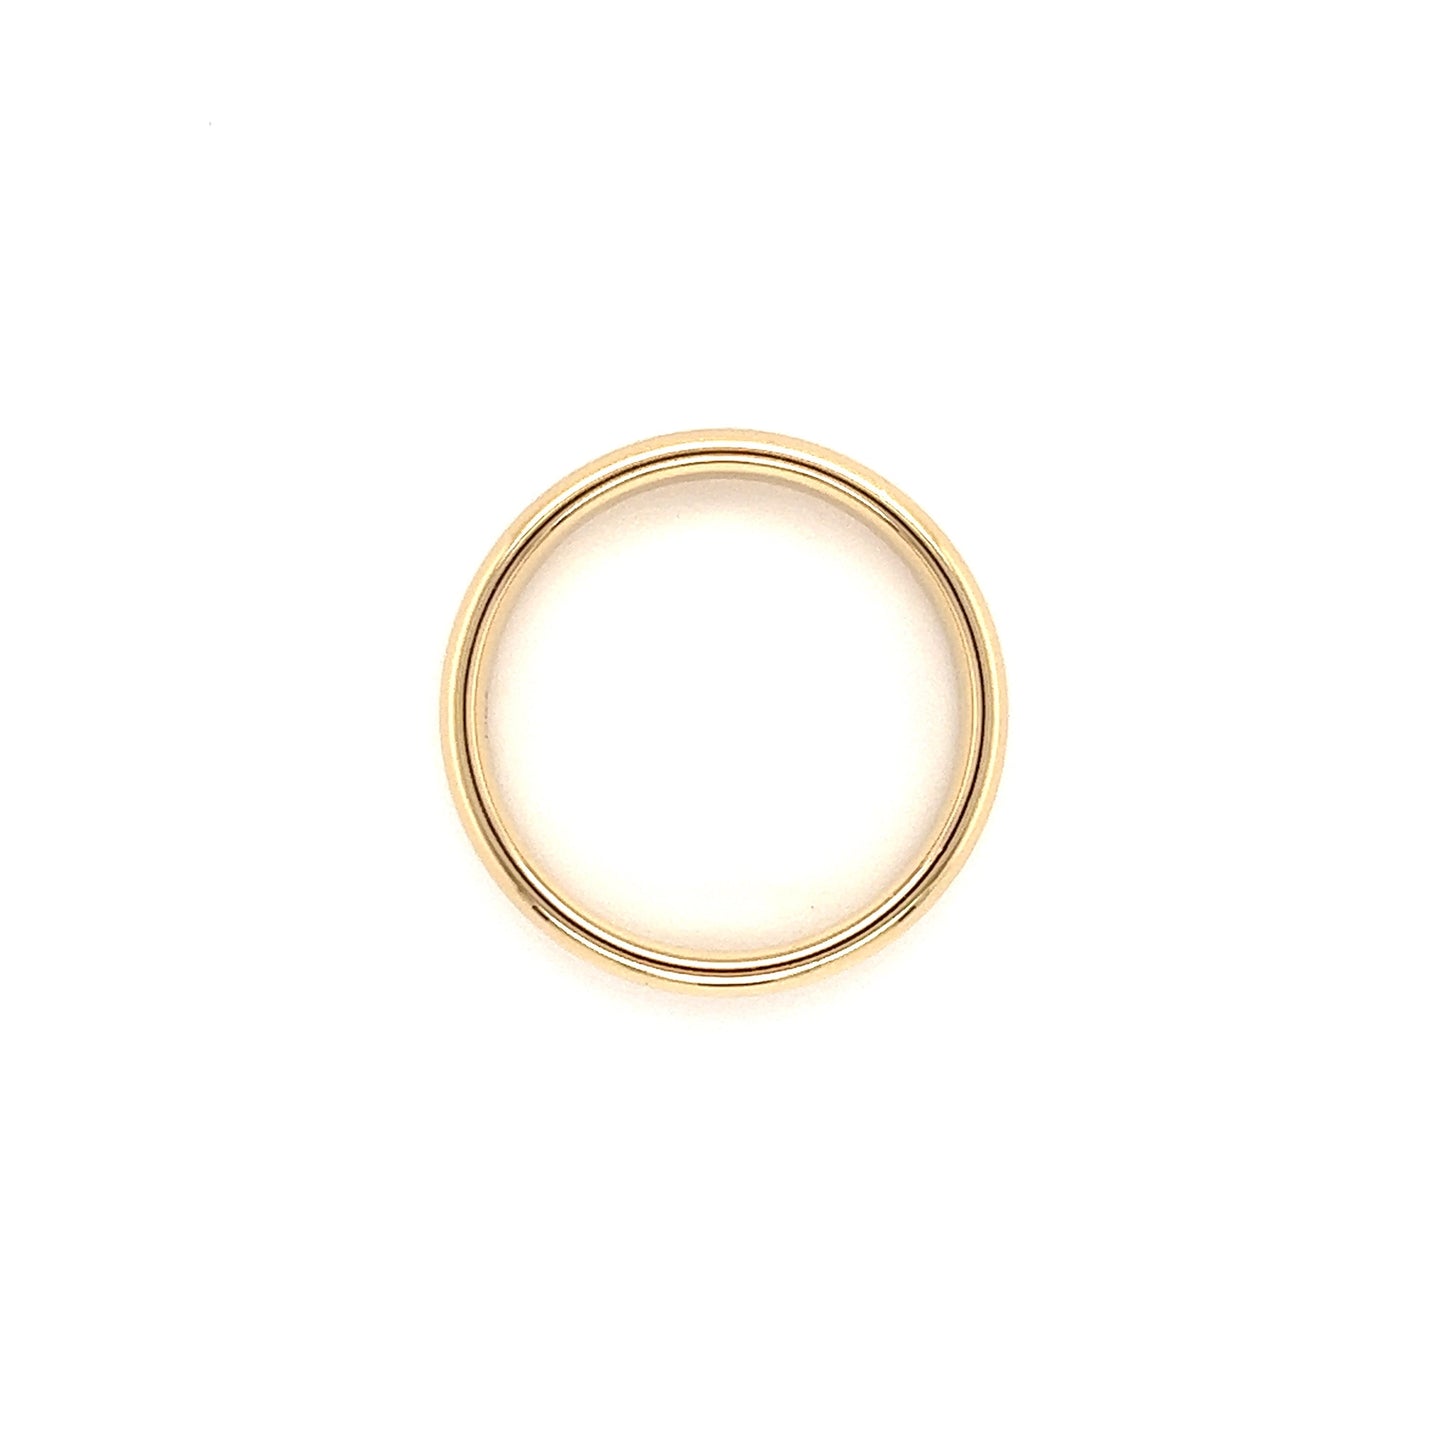 Beveled Edge 5mm Ring with Comfort Fit in 14K Yellow Gold Top View